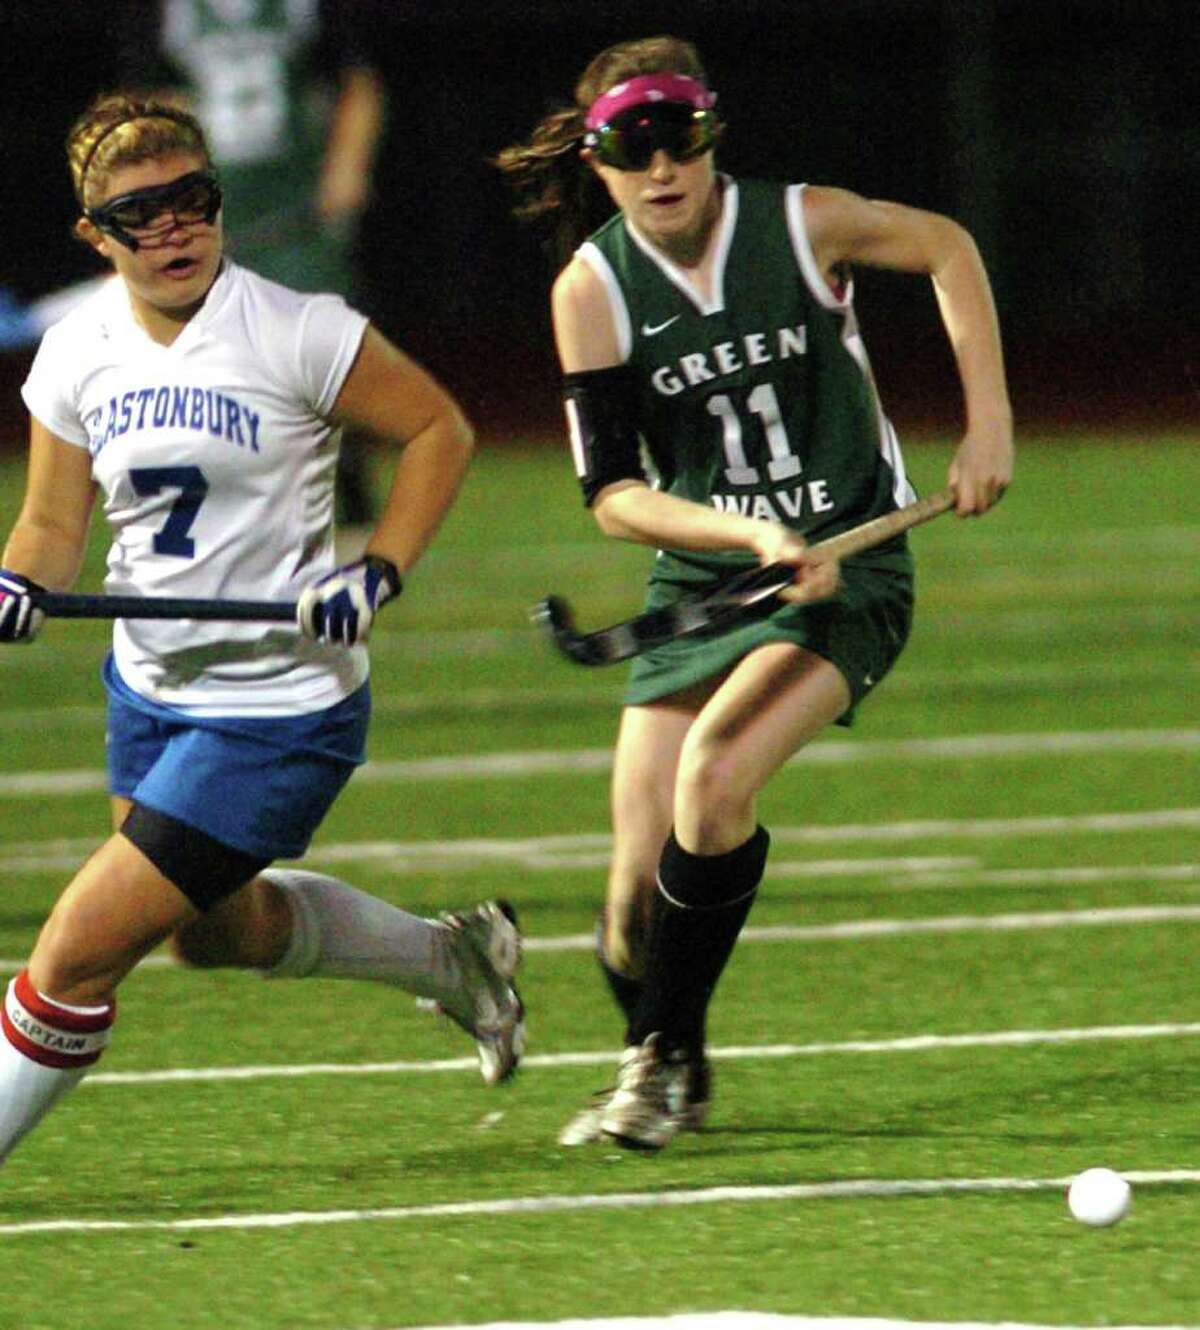 New Milford's 11, Olivia Monteiro competes with Glastonbury's 7, Taylor Moreau during the field hockey game at Watertown High School Nov. 16, 2010.